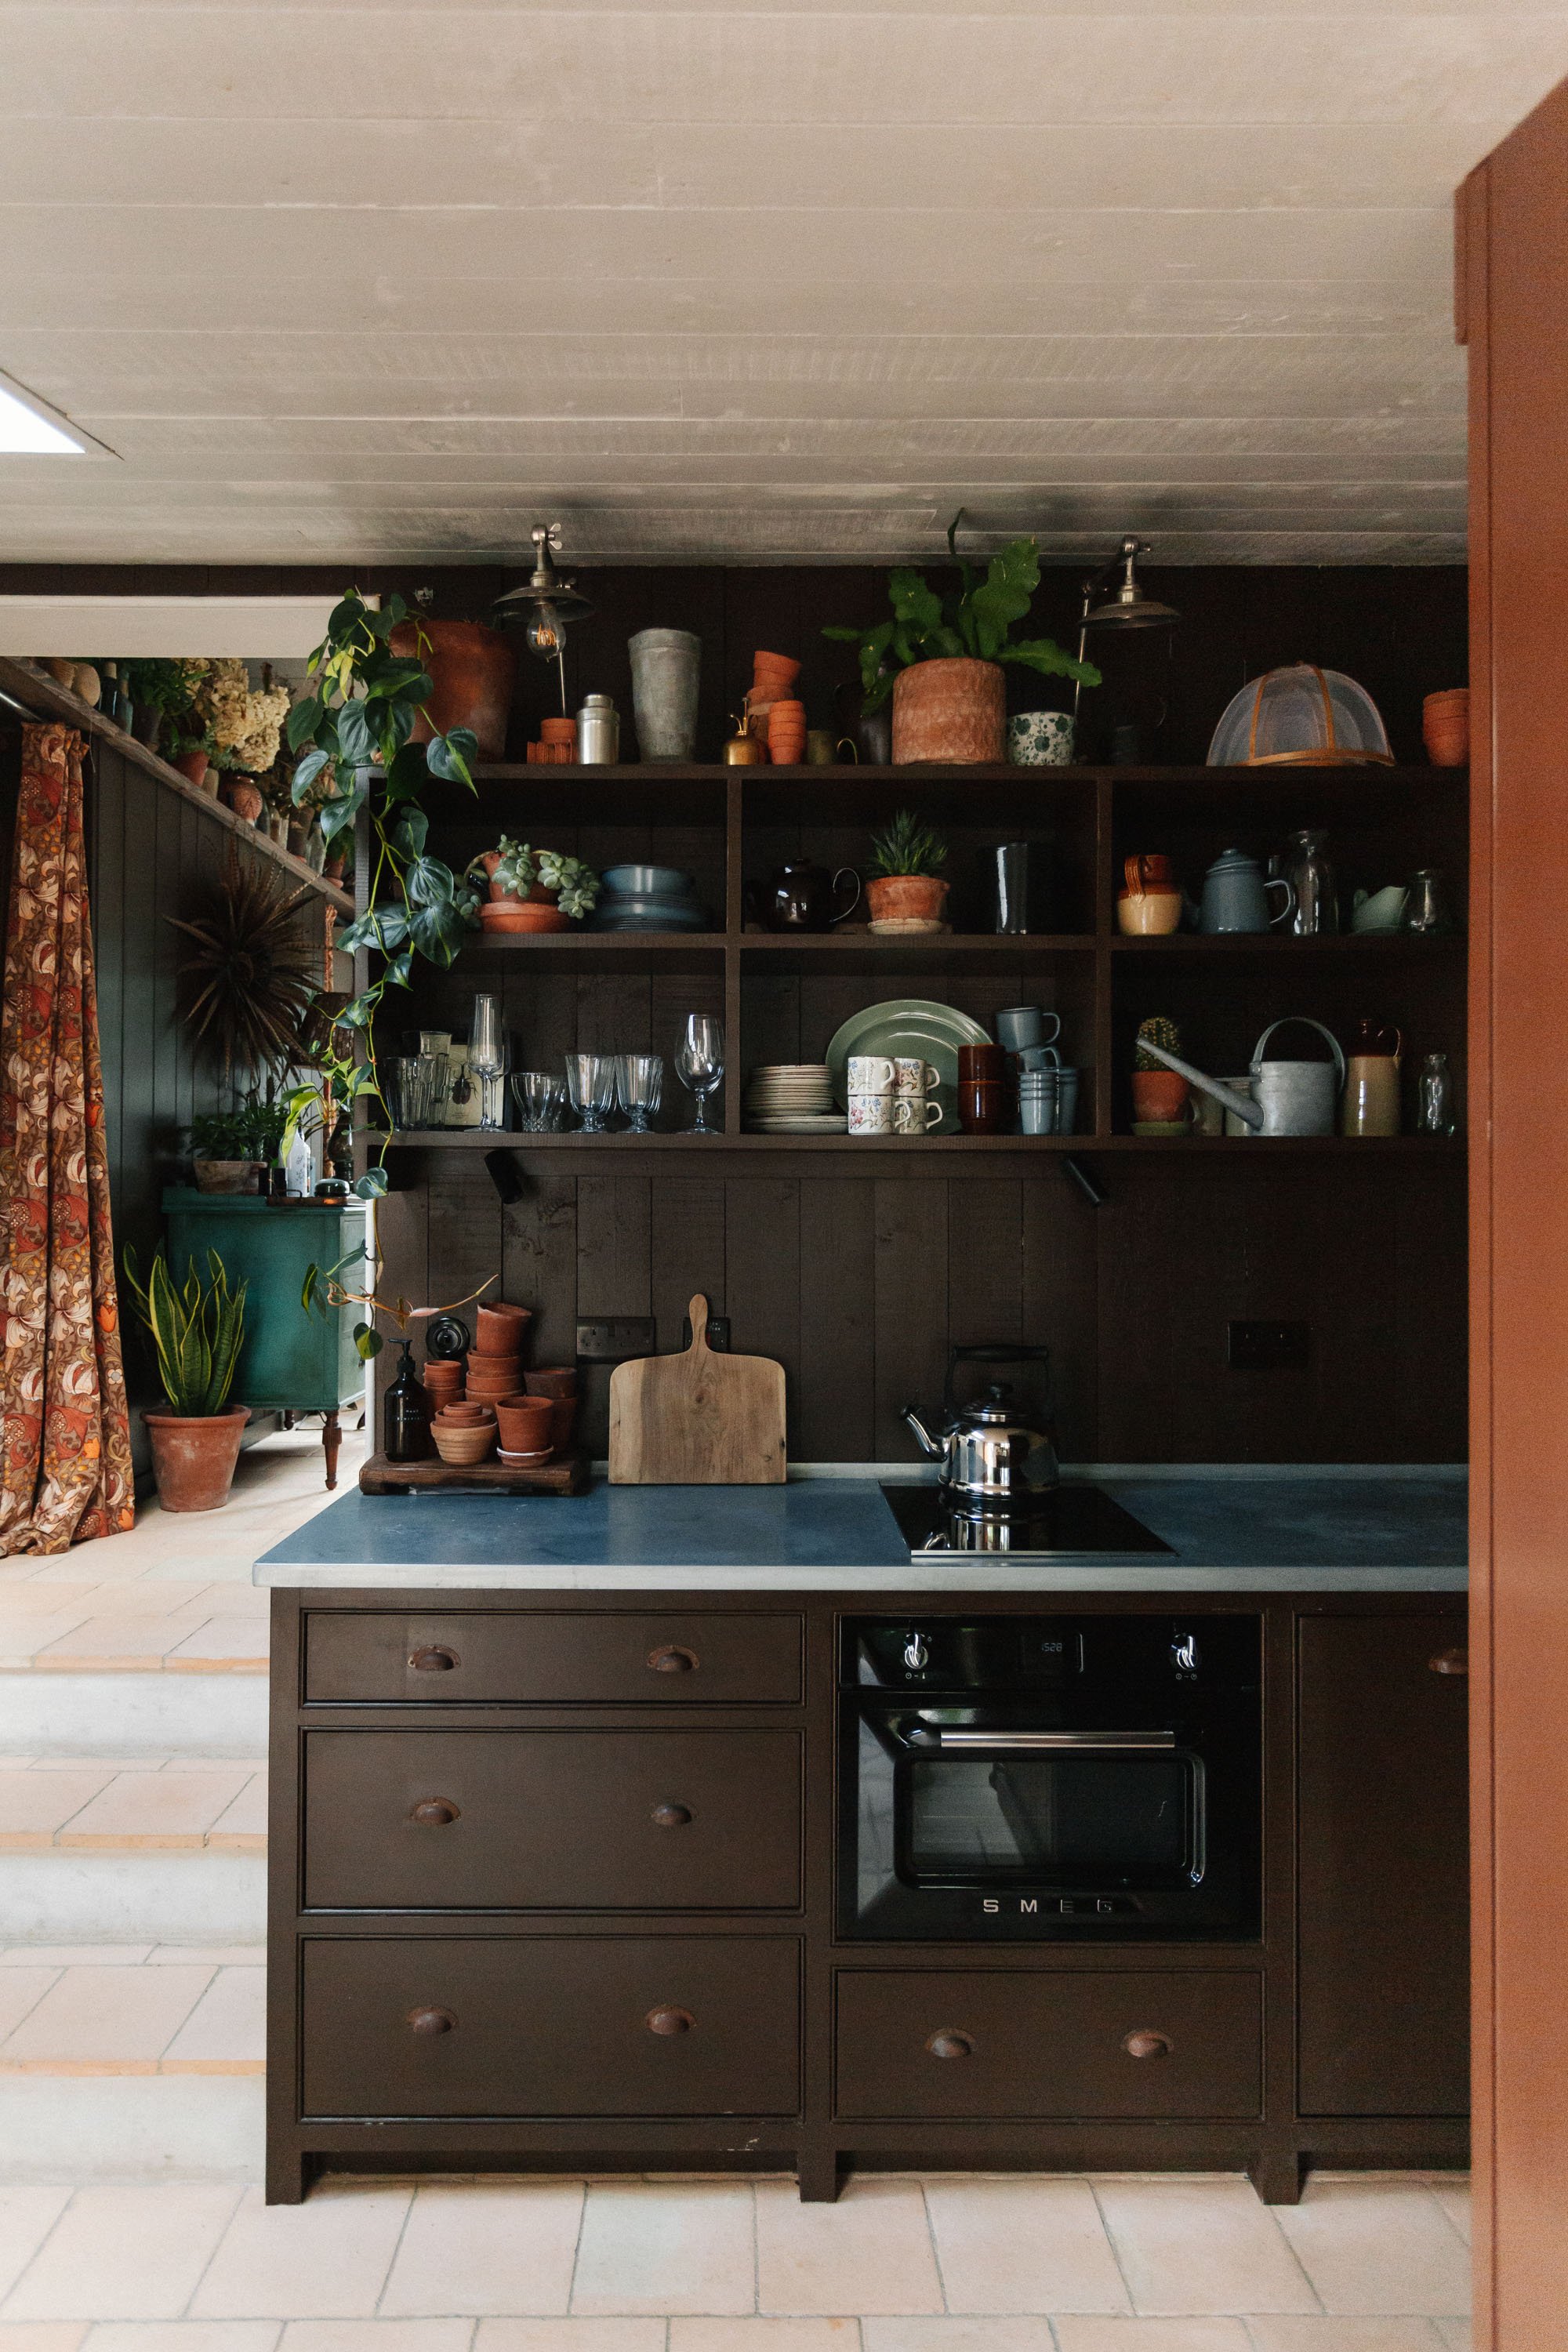 kitchen with open shelving, painted in dark brown